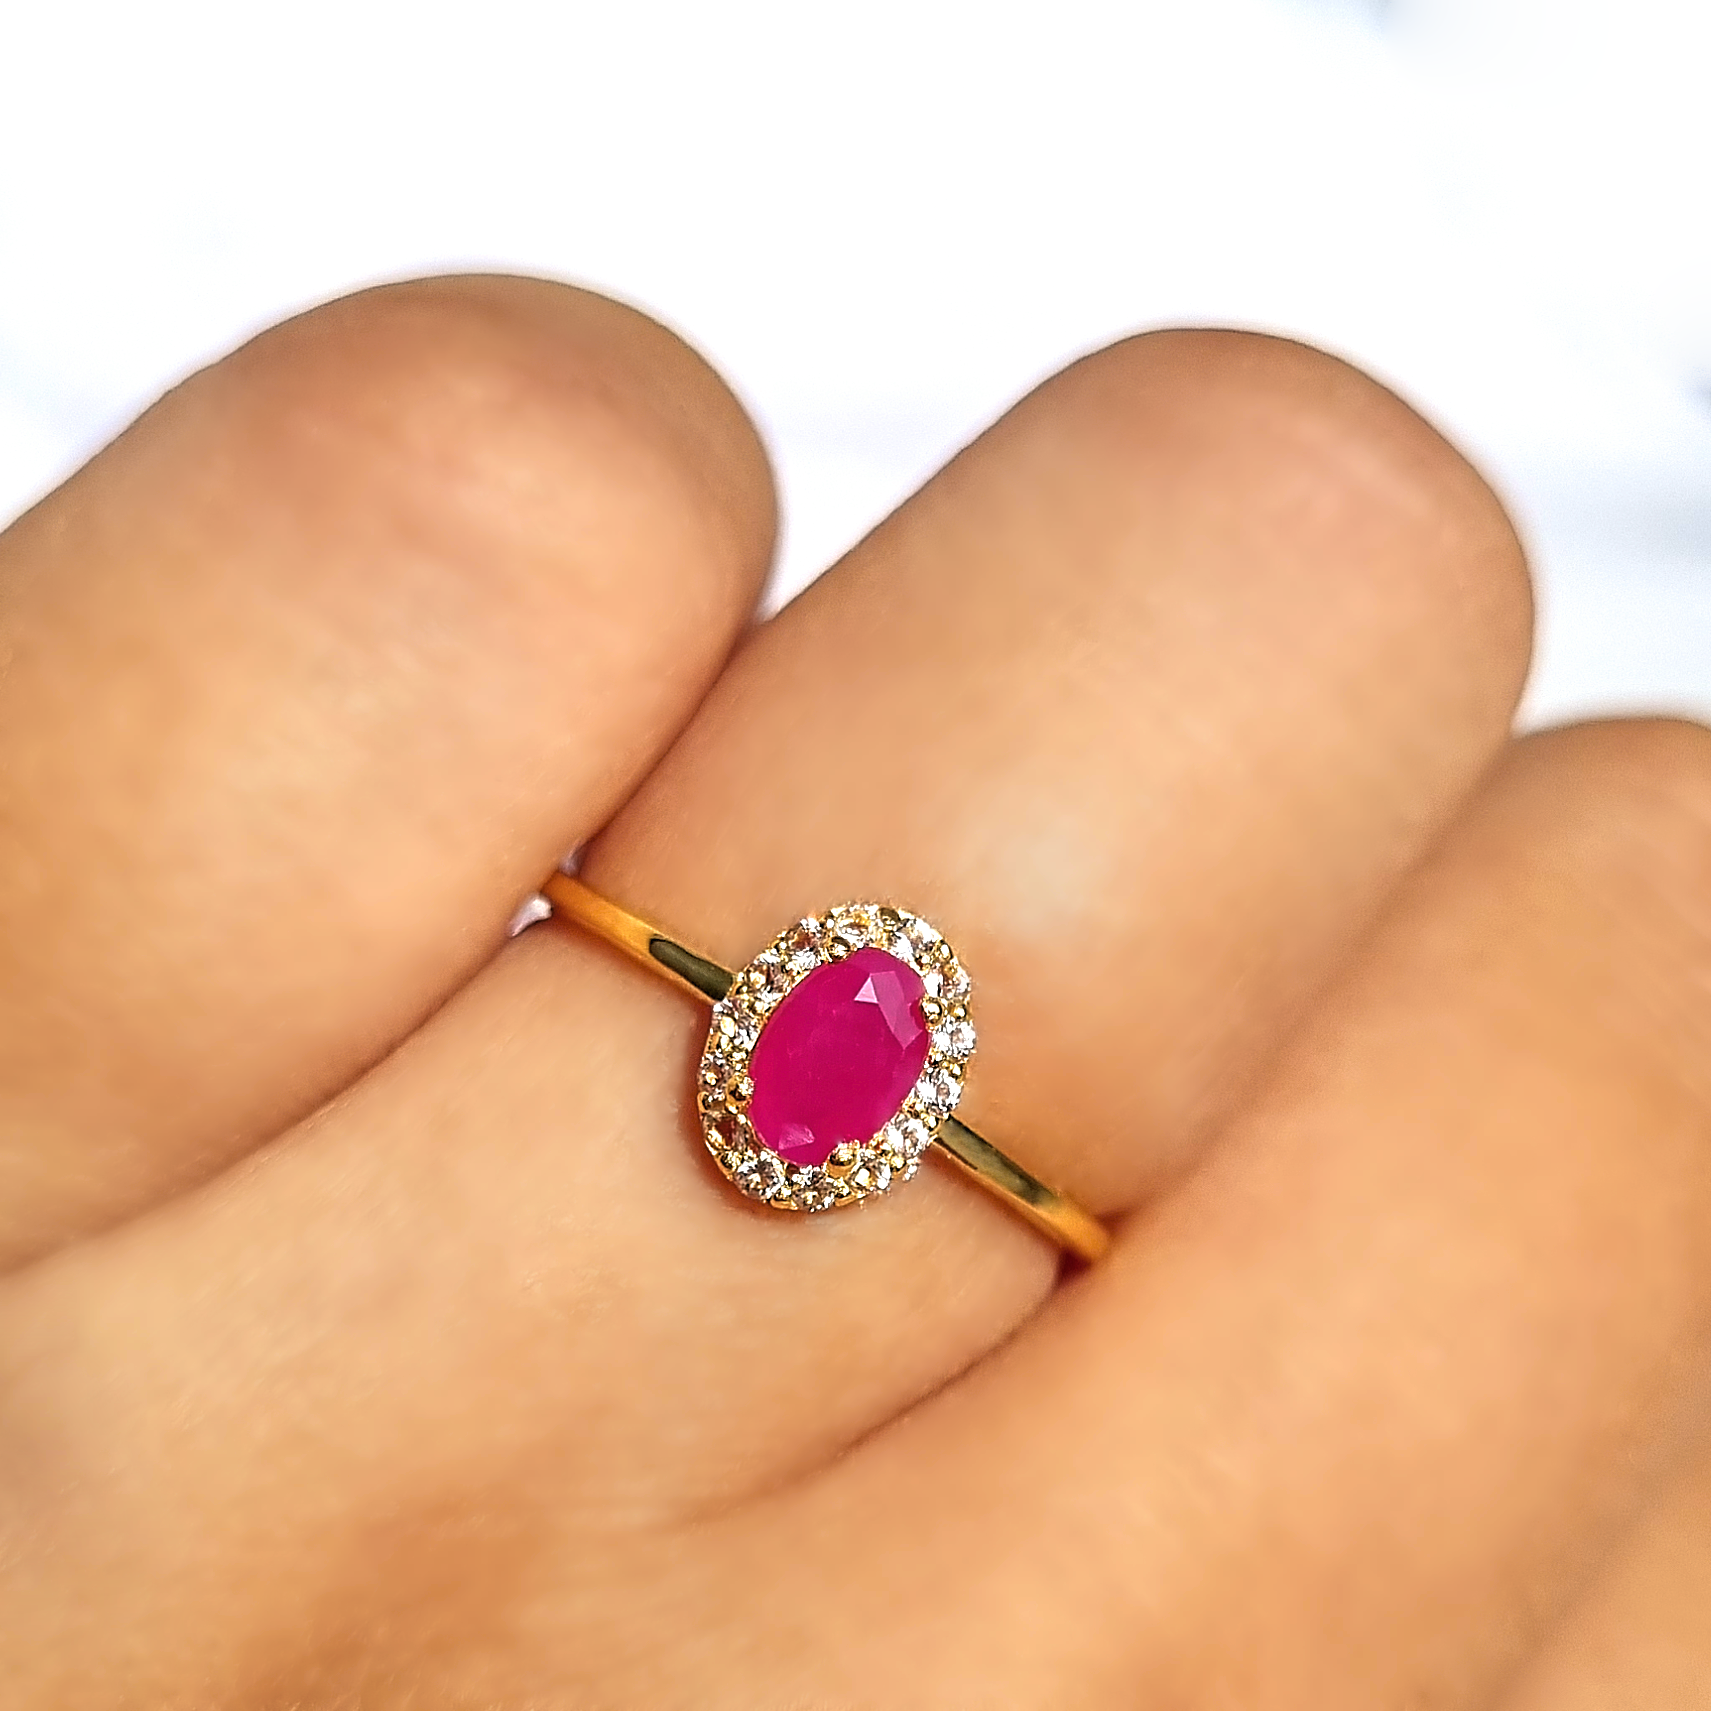  oval cut pinkish red gemstone and white topaz engagement , promise and wedding ring in 18k gold vermeil